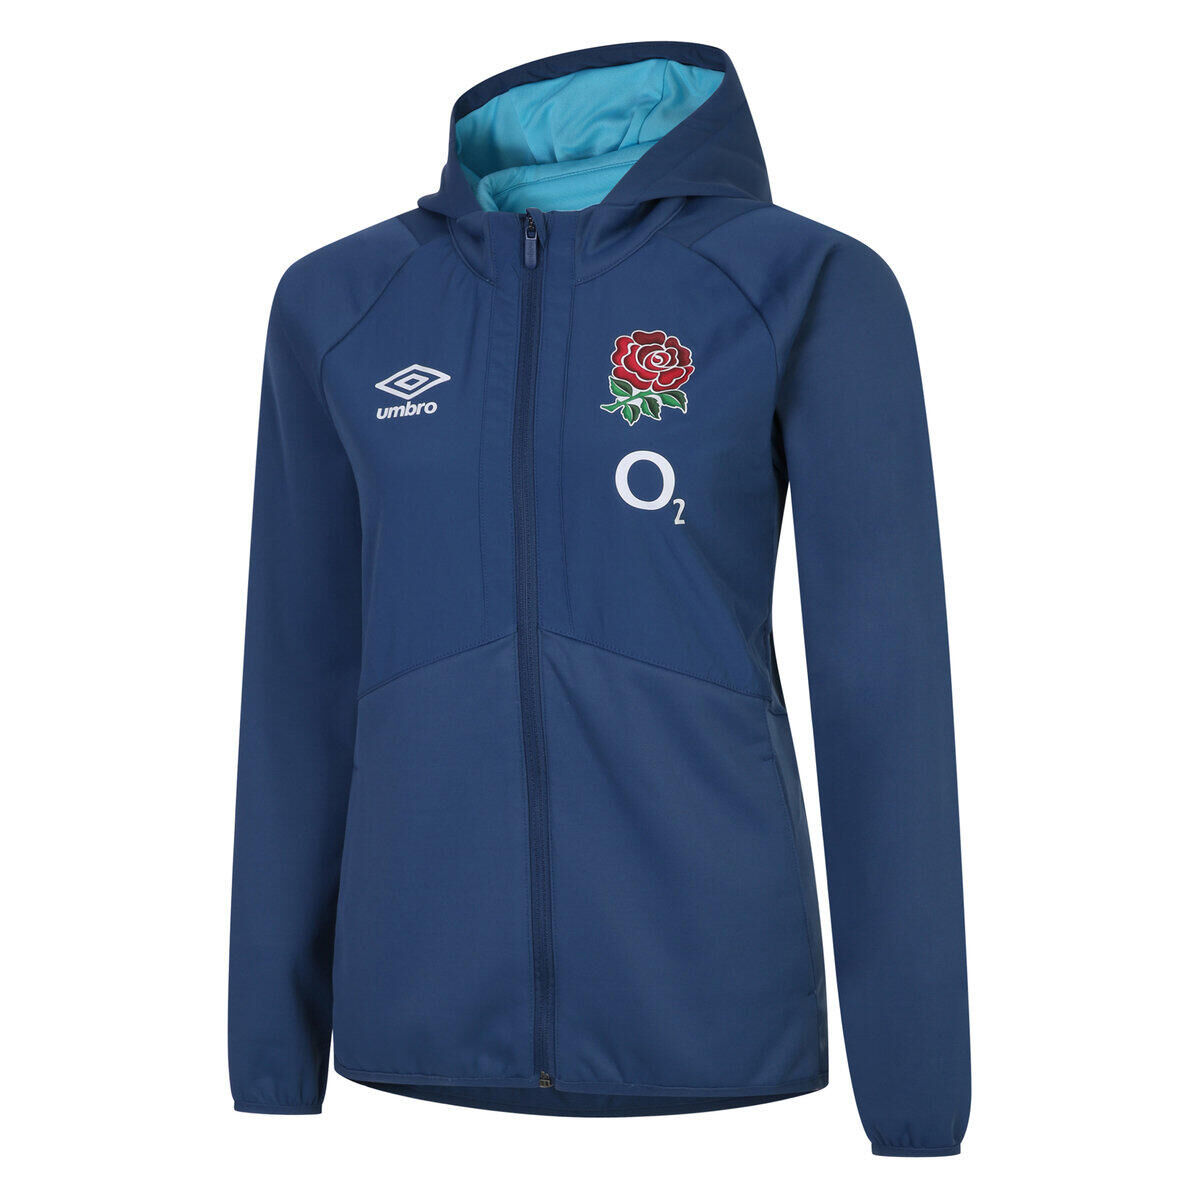 UMBRO England Rugby Womens/Ladies 22/23 Full Zip Jacket (Ensign Blue/Bachelor Button)